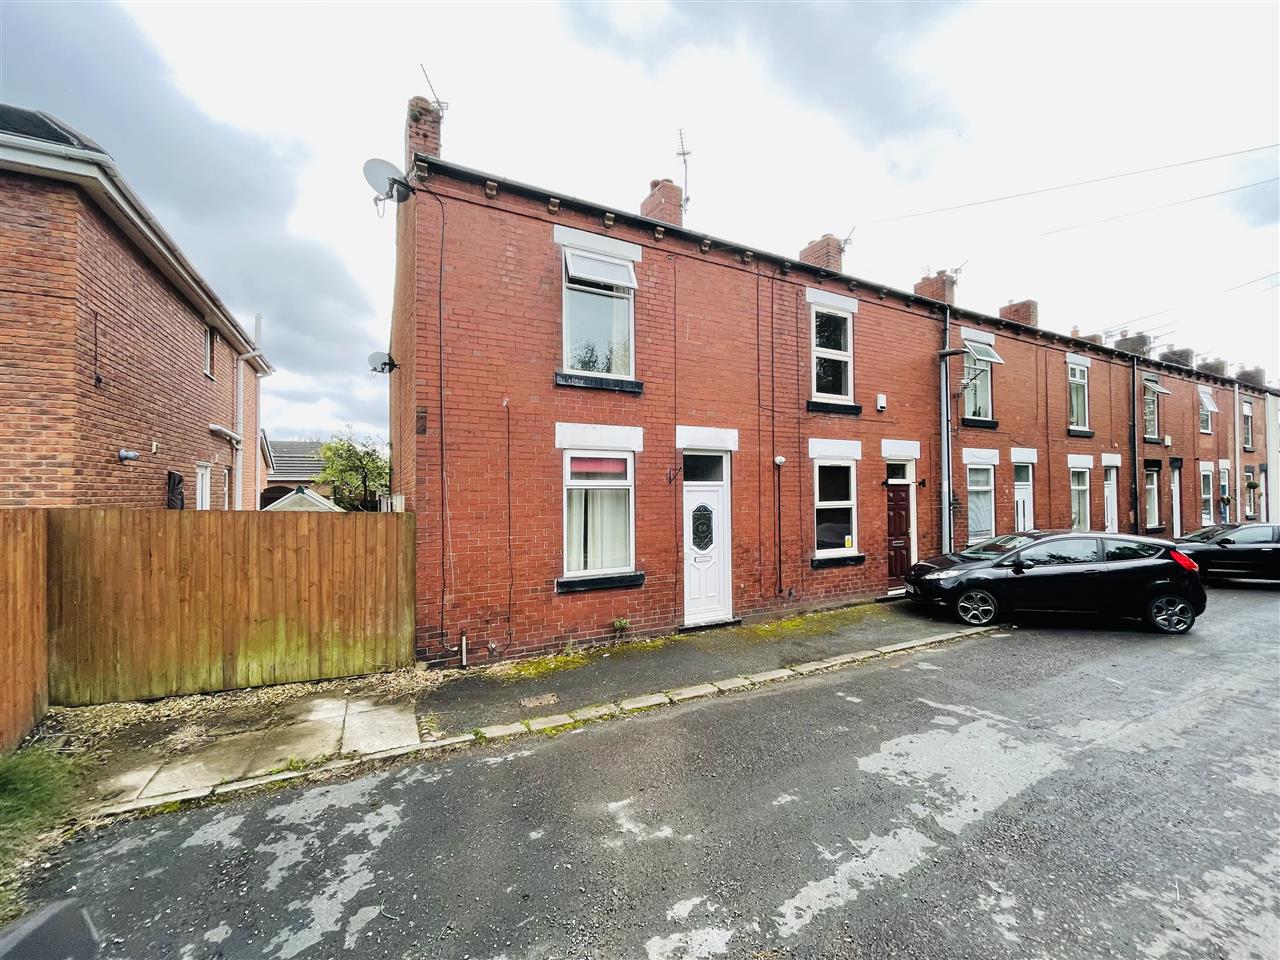 3 bed end of terrace for sale in Railway Street, Hindley, WN2